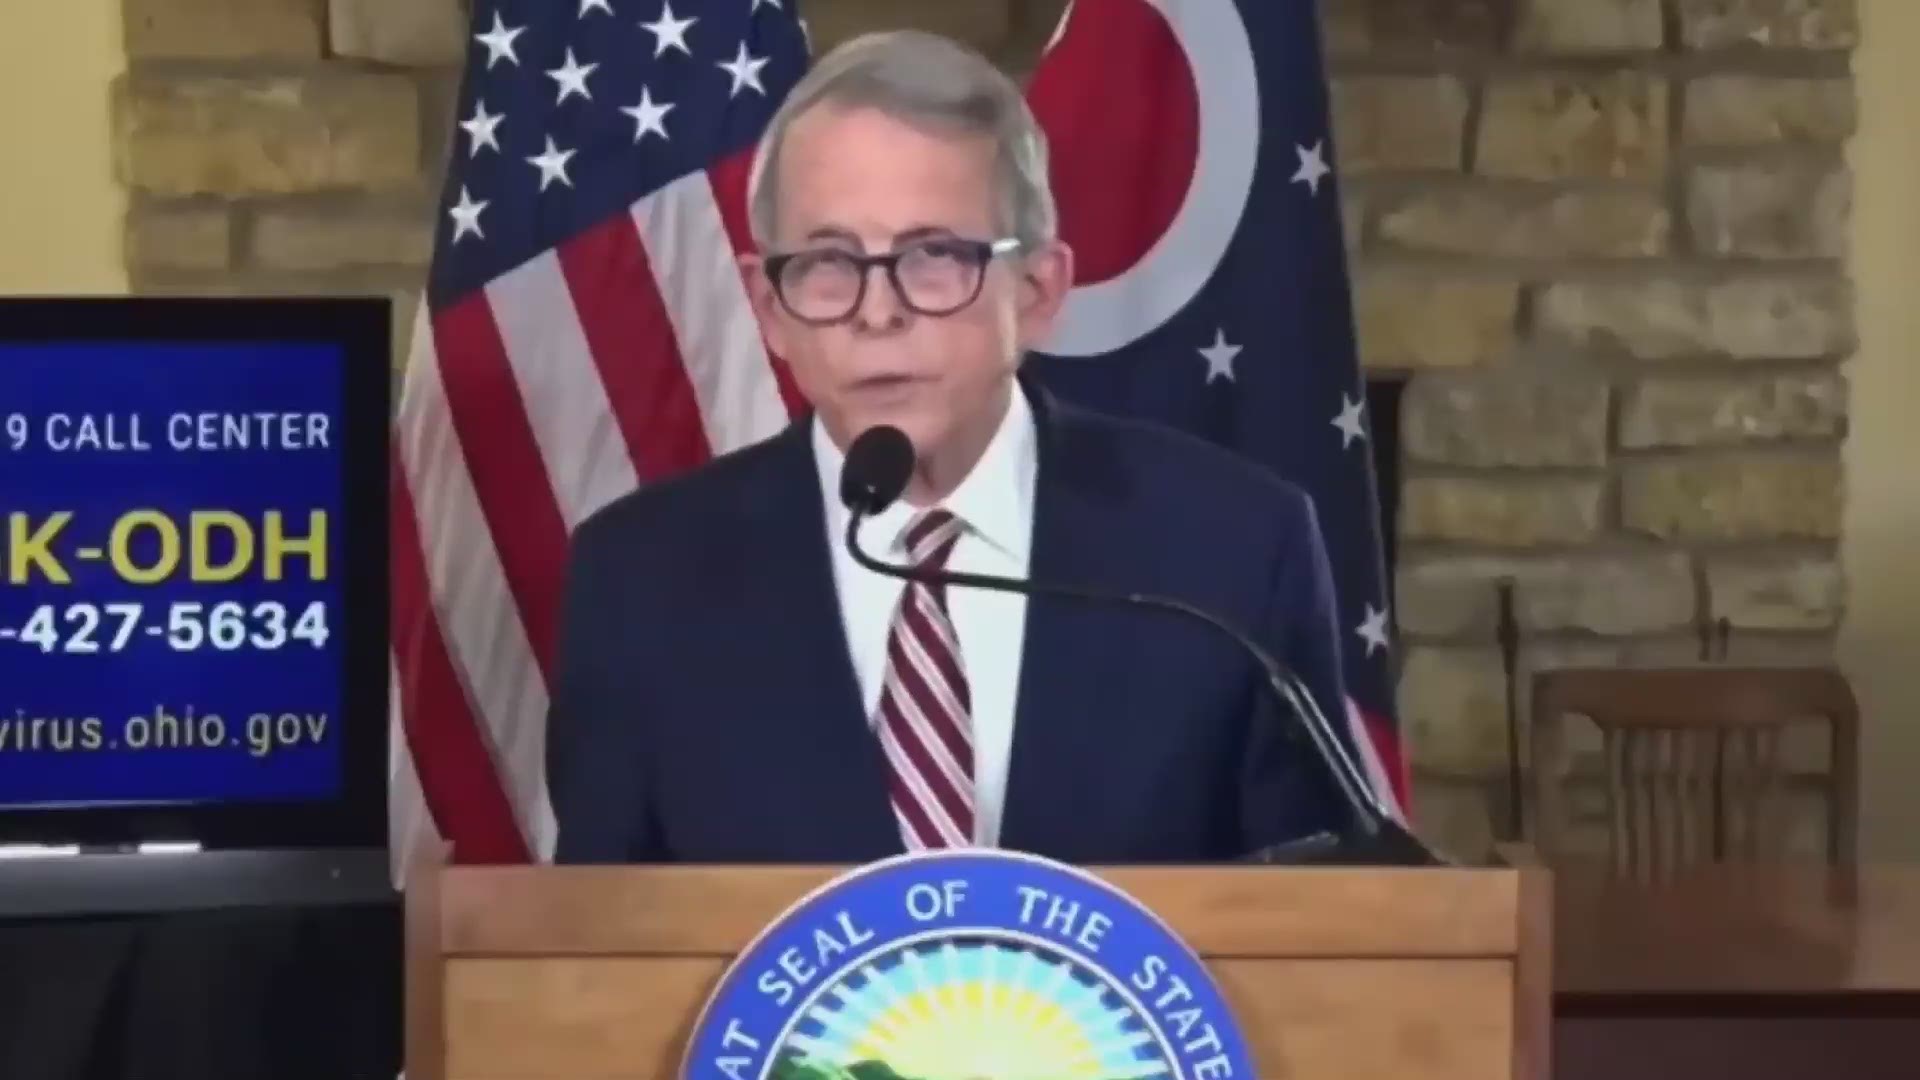 Many elderly are able to call in by phone to register.  Governor DeWine is looking into the problem for those who can't register due to lack of computers.